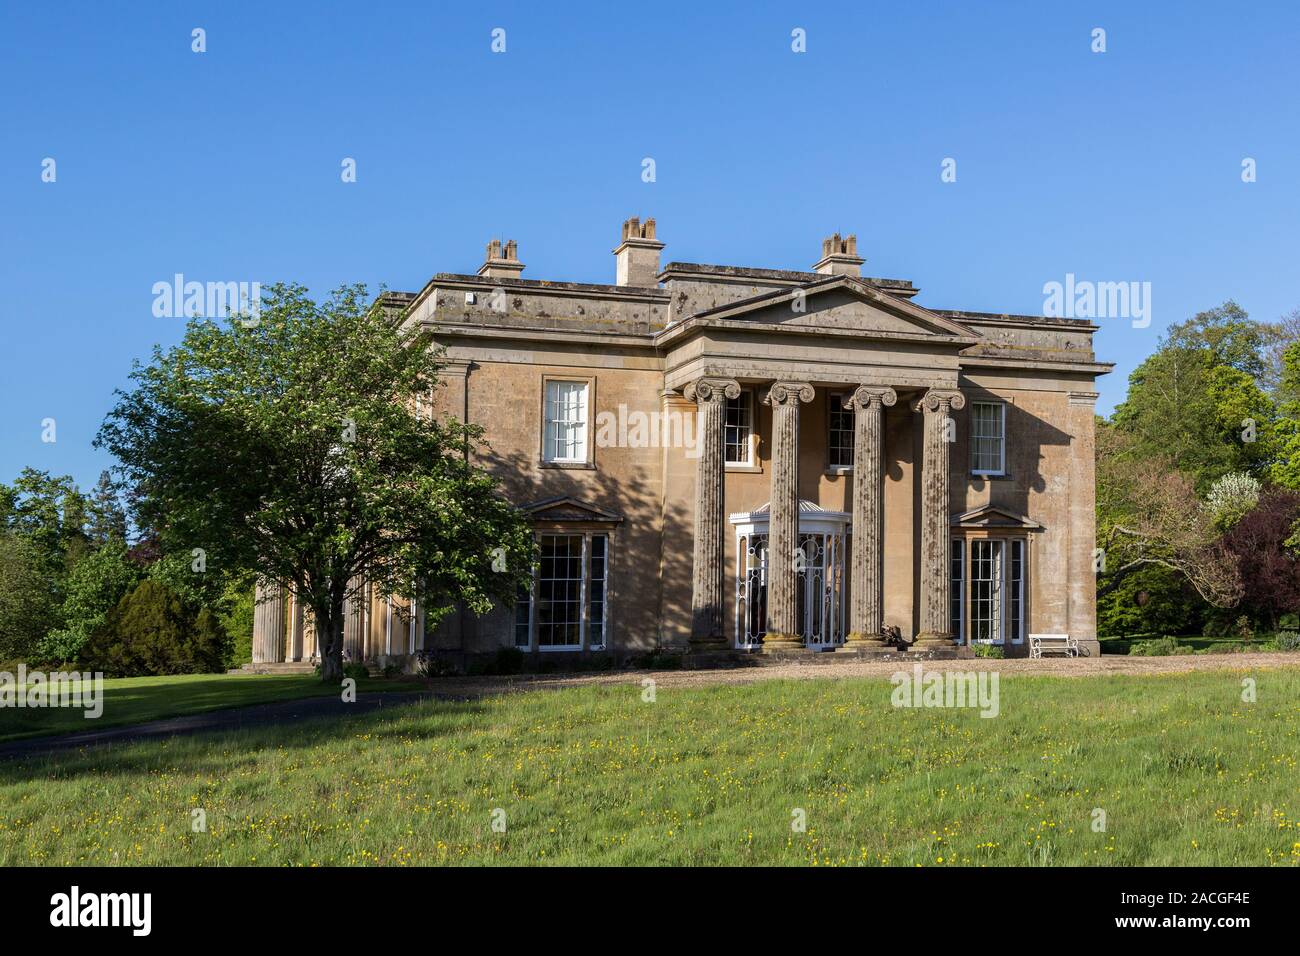 Clytha House, neo-classical architecture in Greek Doric style, Monmouthshire, Wales, UK Stock Photo